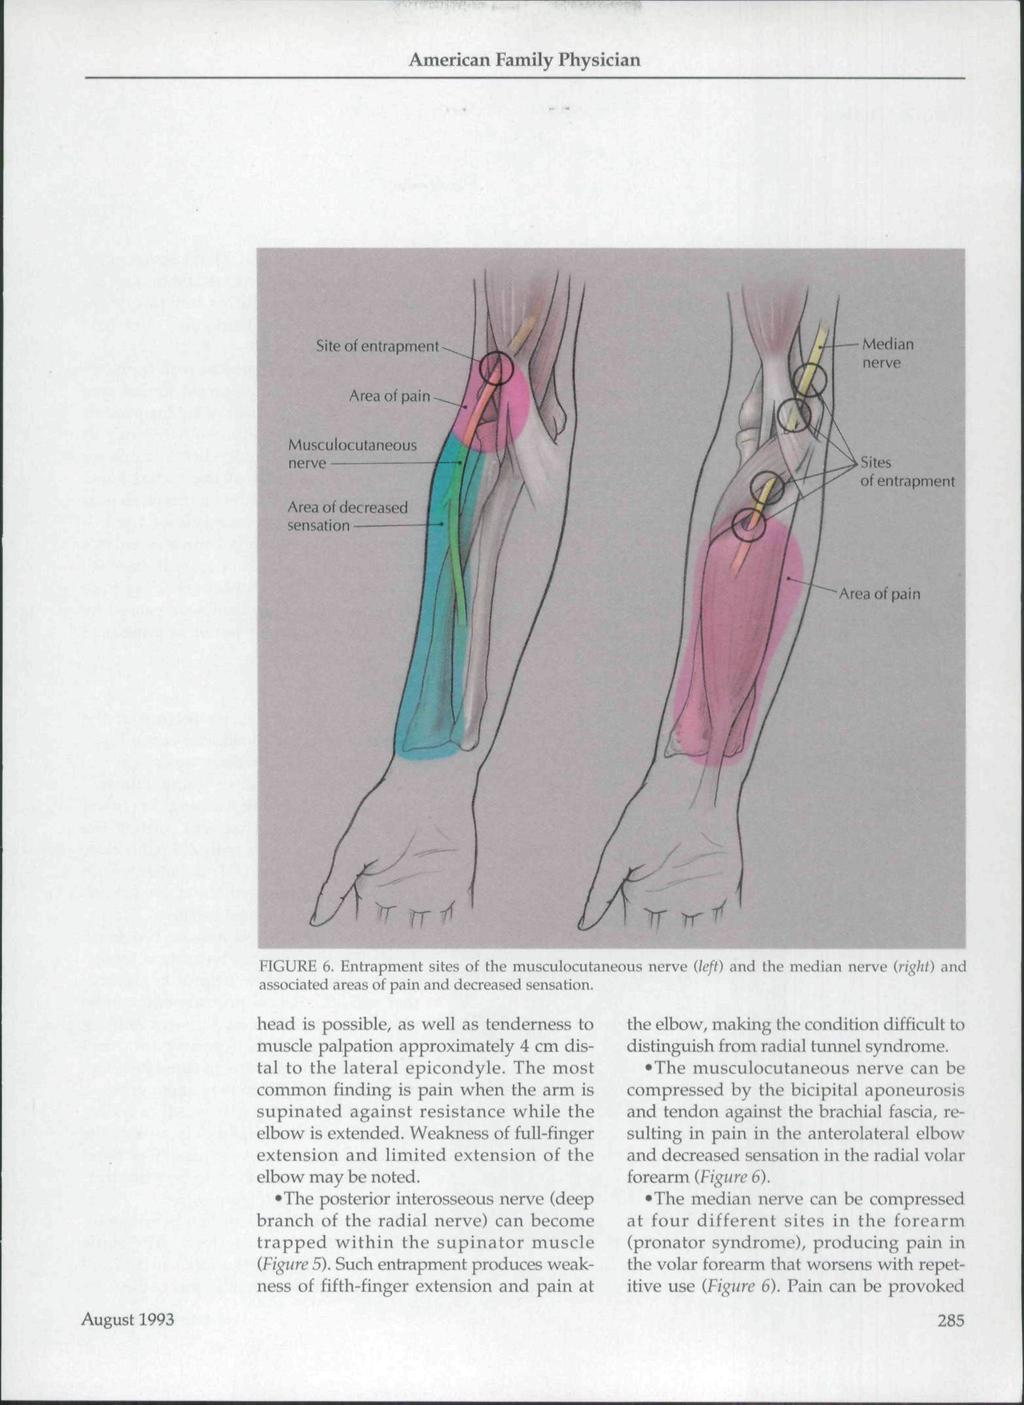 Area of decreased sensation FIGURE 6. Entrapment sites of the musculocutaneous nerve Heft) and the median nerve (right) and associated areas of pain and decreased sensation.